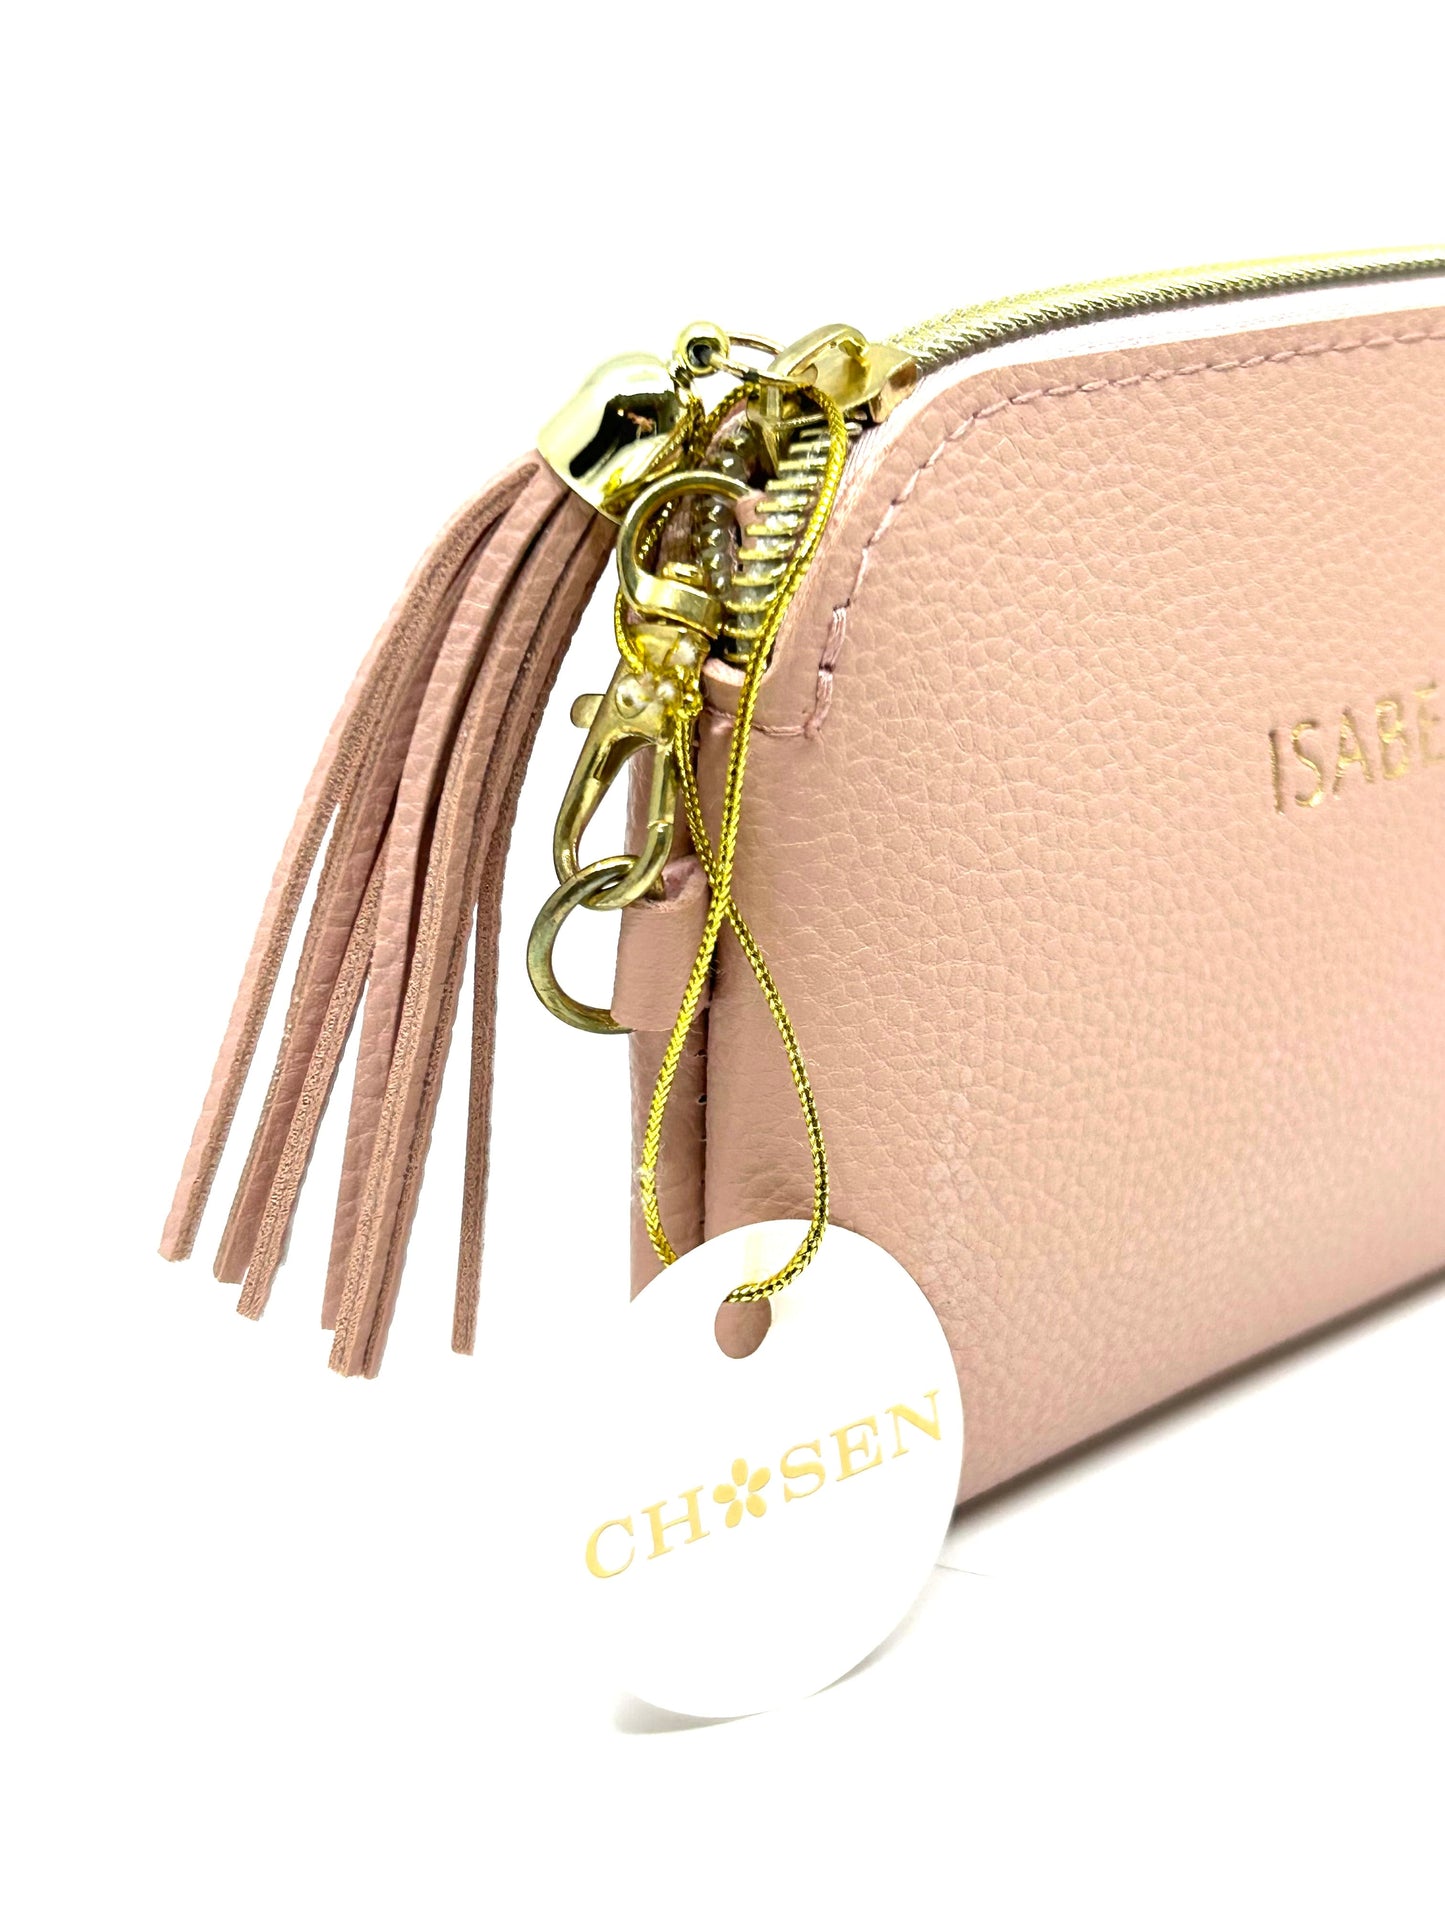 Chosen Personalized Name Madeline Wristlet Purse for Women